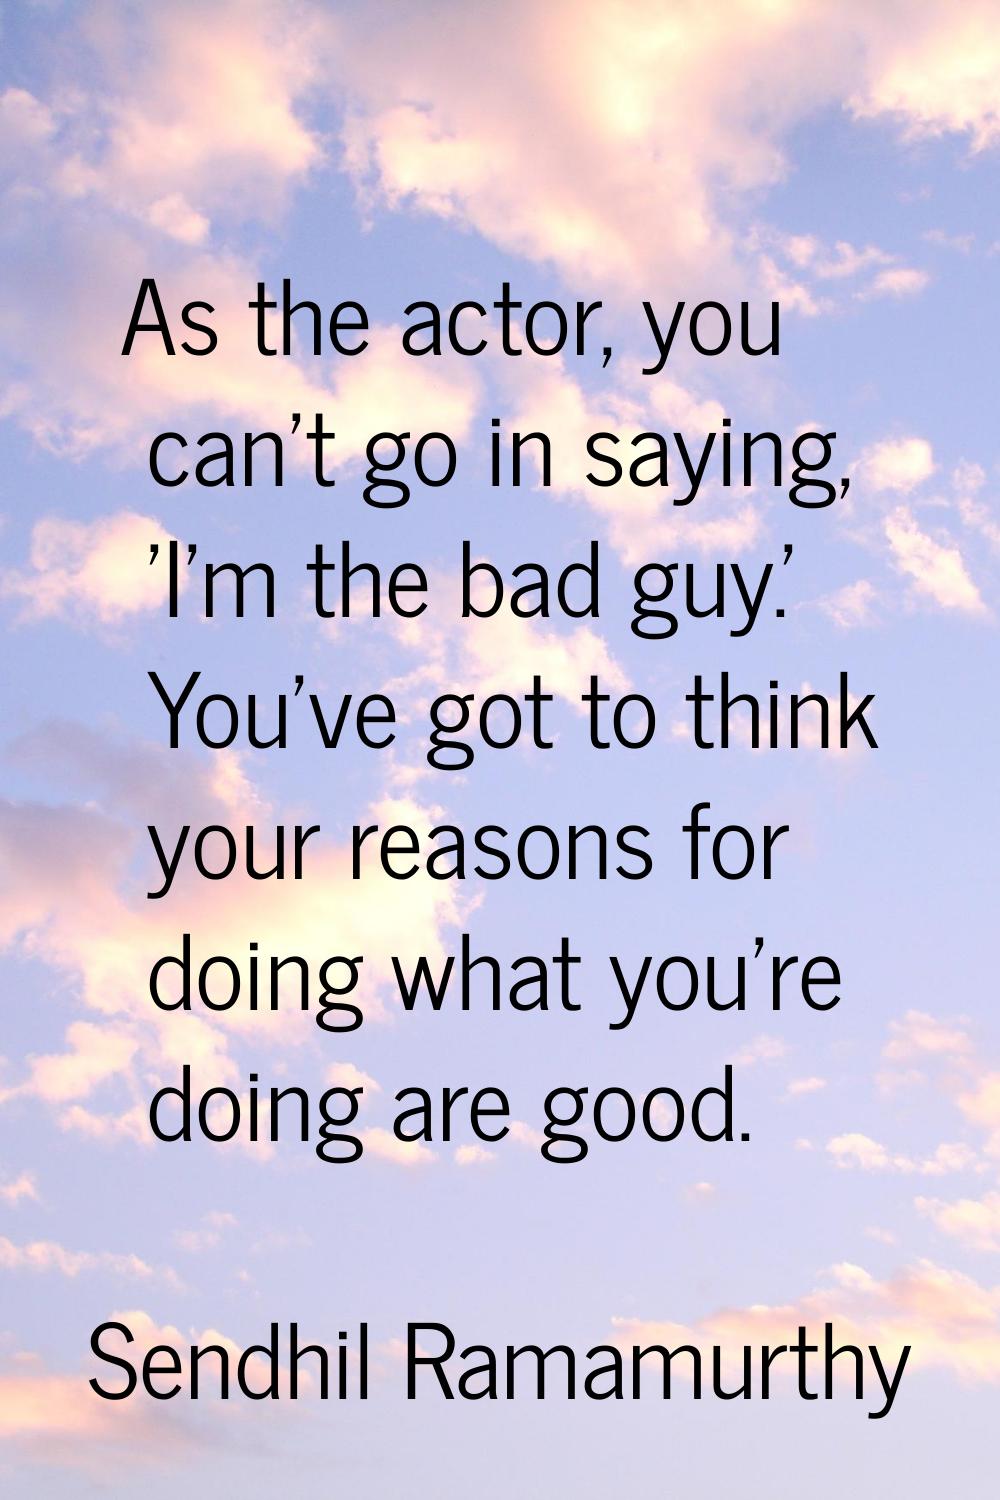 As the actor, you can't go in saying, 'I'm the bad guy.' You've got to think your reasons for doing